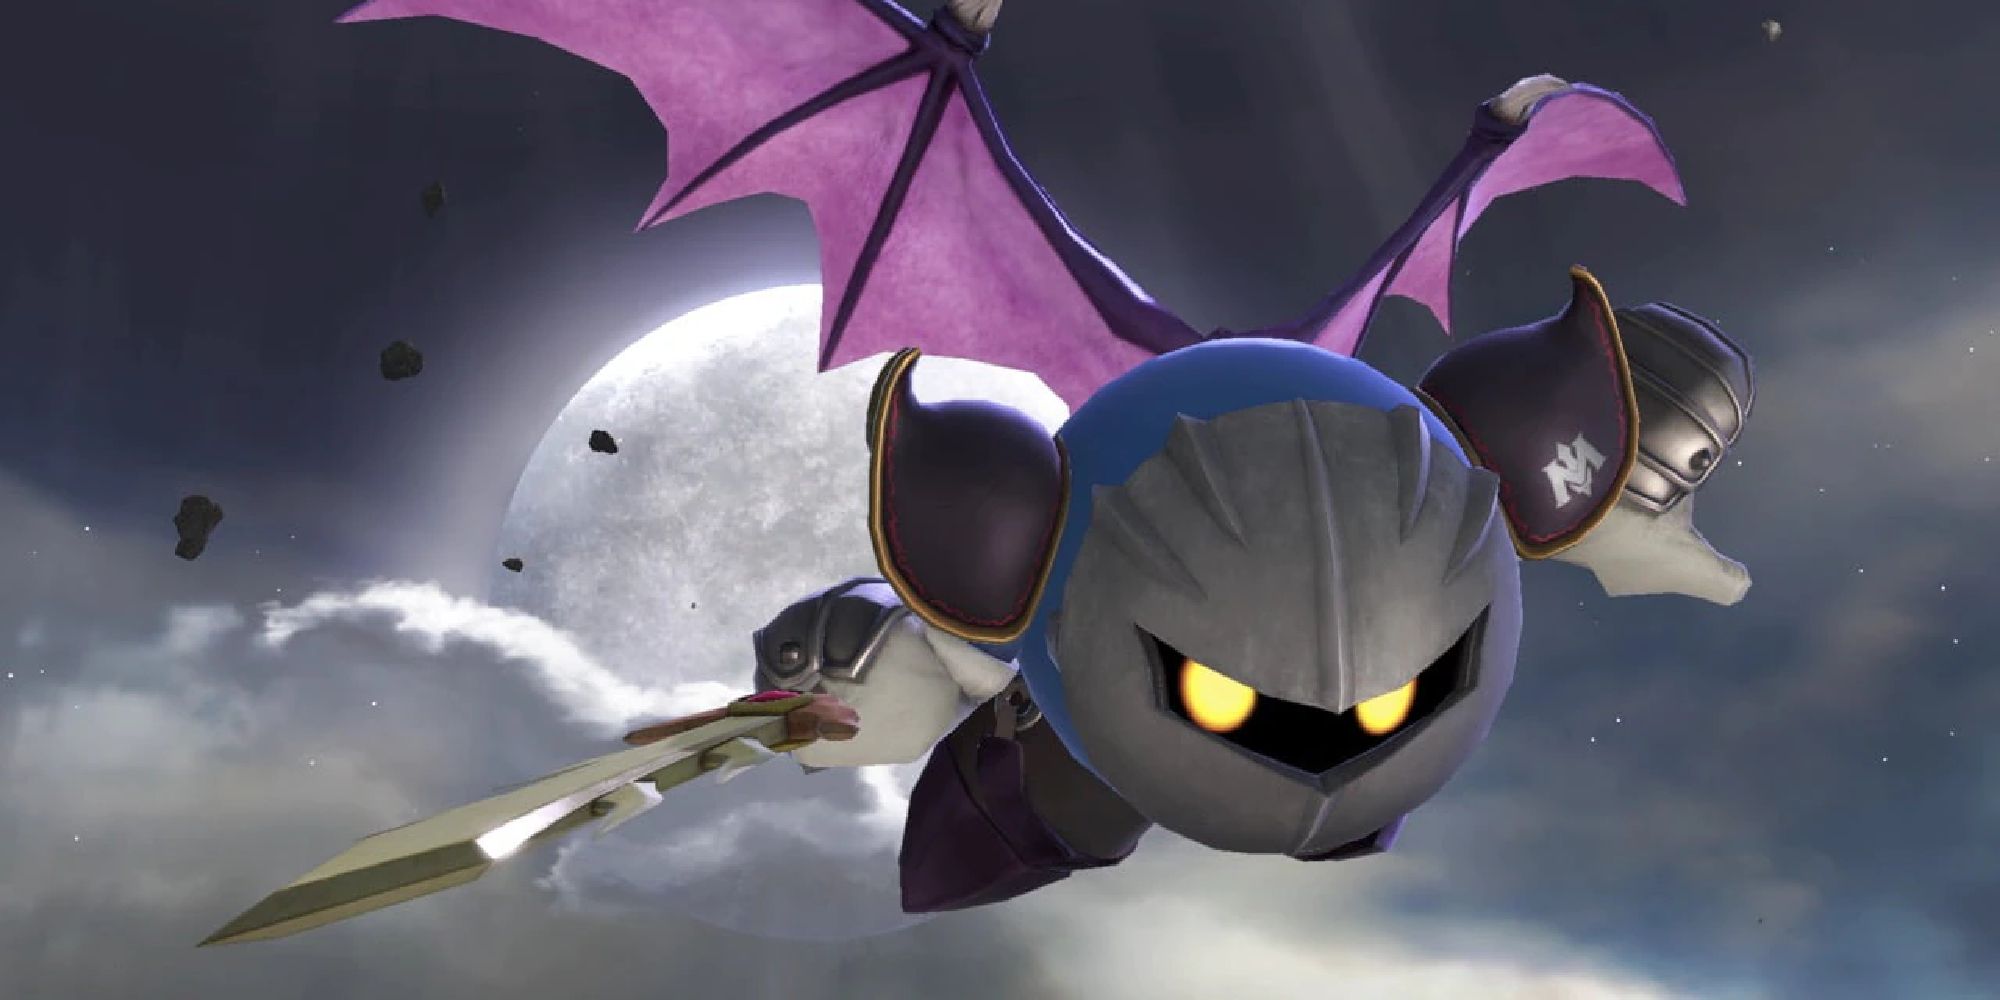 Meta Knight flying in front of the moon